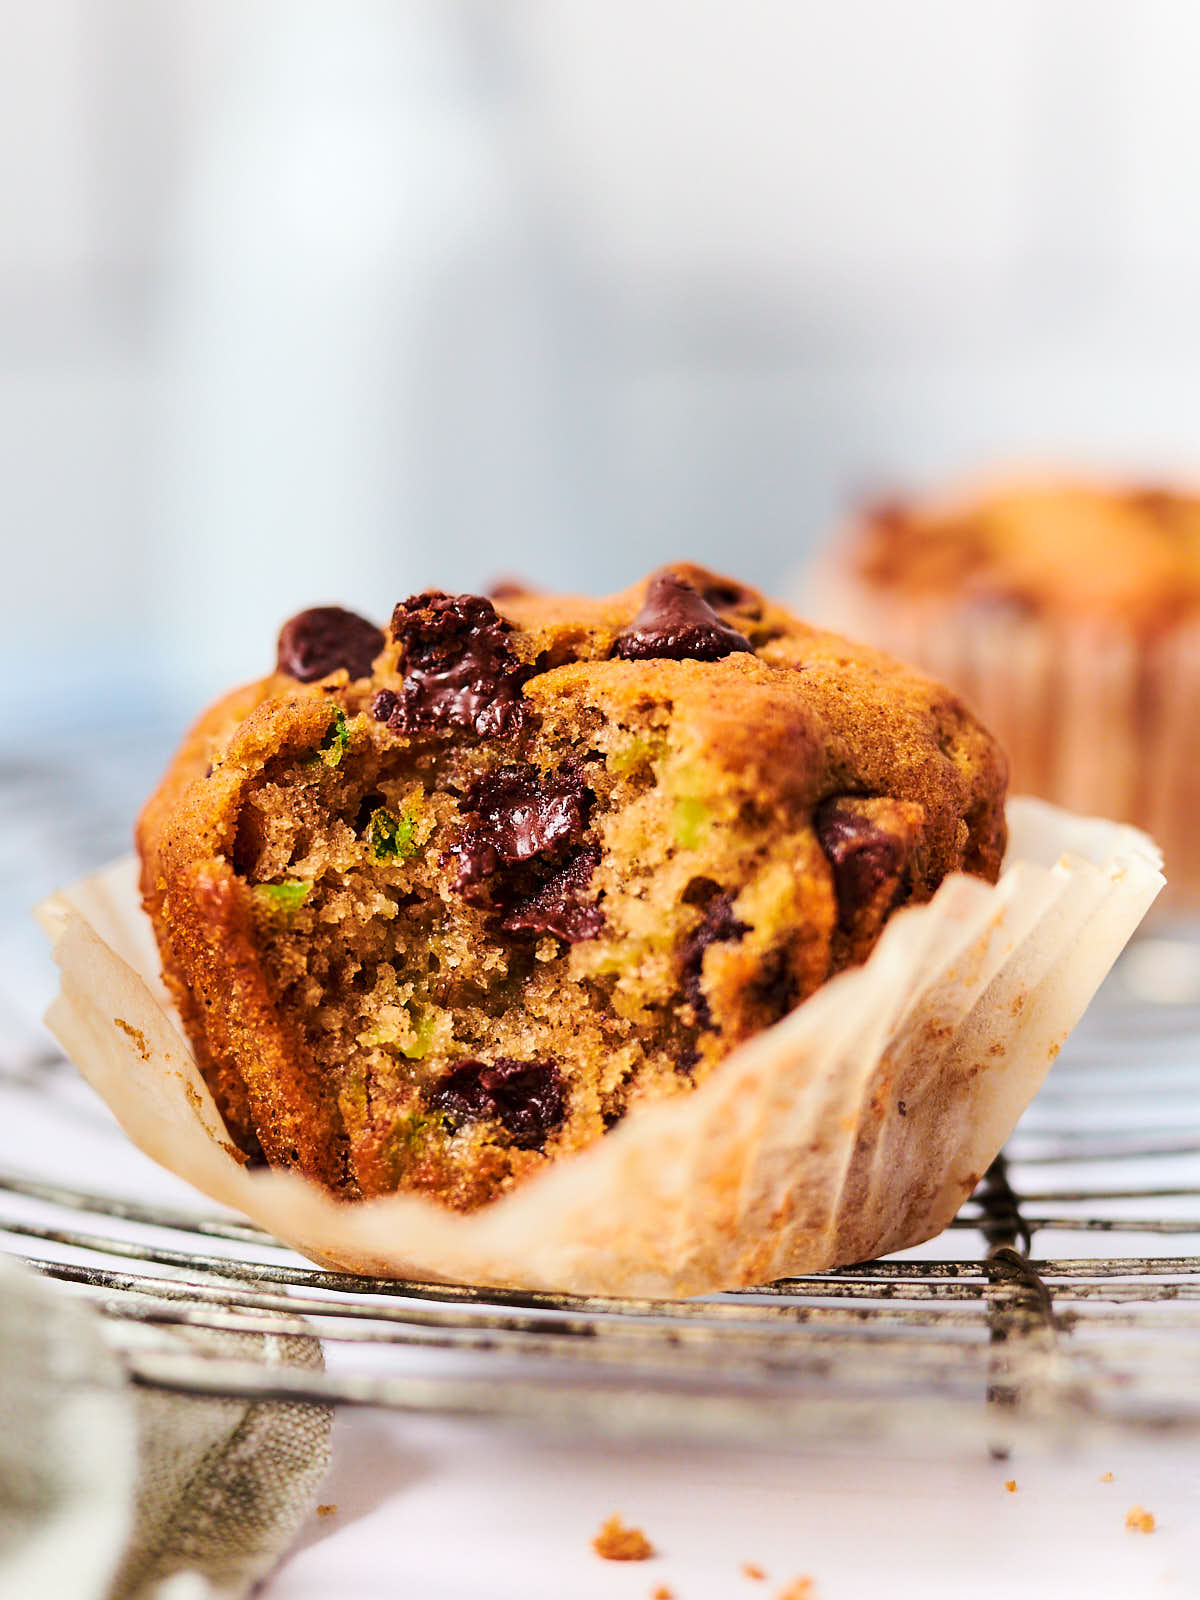 A Vegan Zucchini Muffin with chocolate chips with a bite out of it.